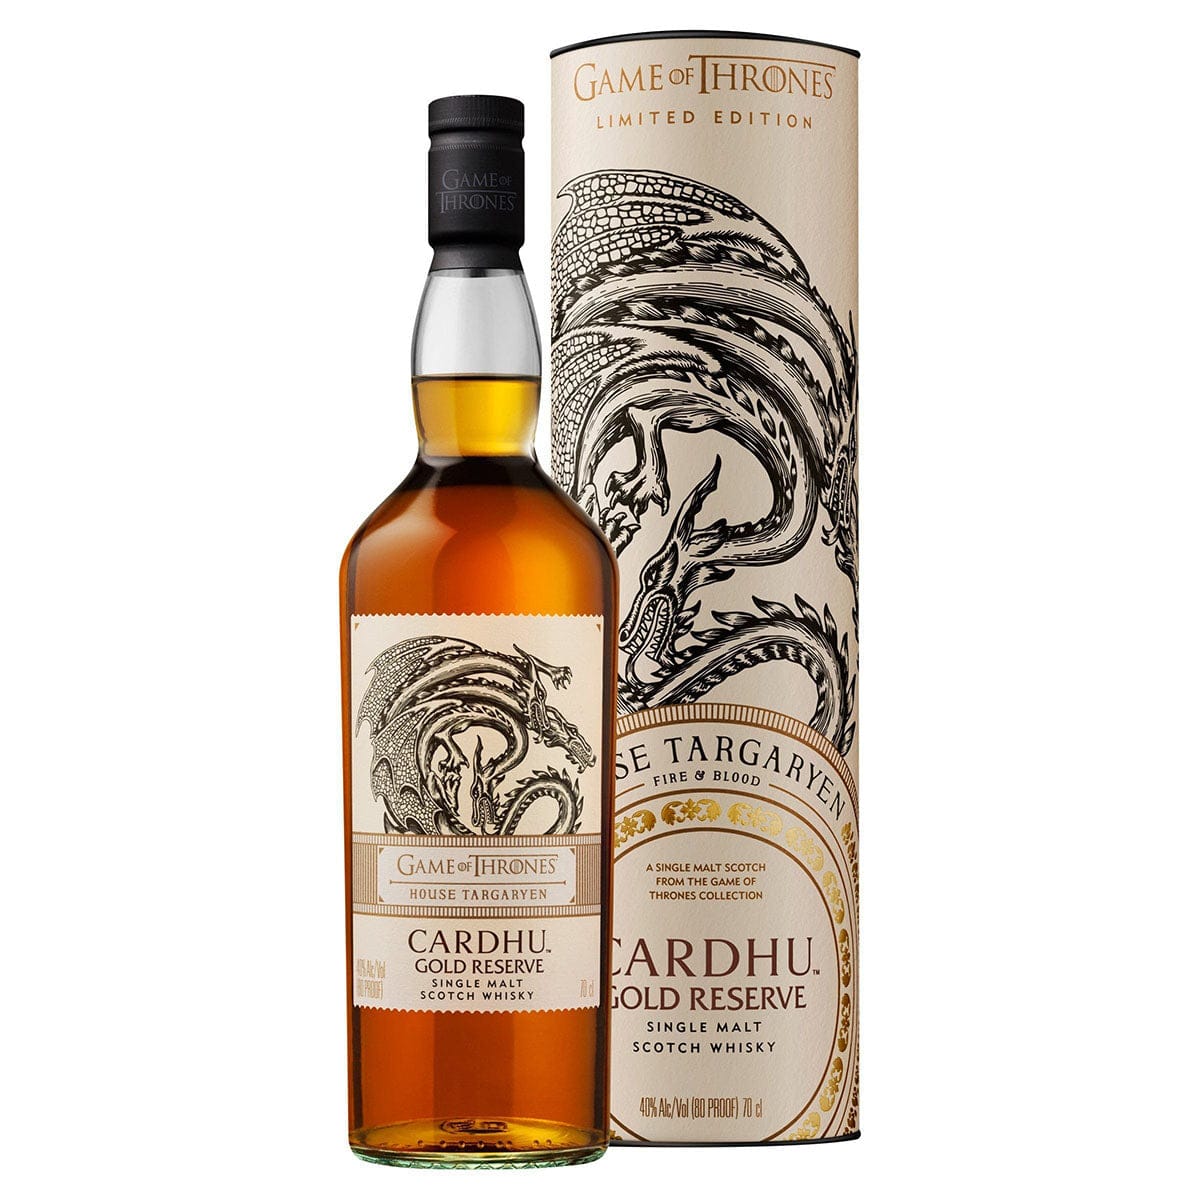 Game of Thrones Cardhu Gold Reseve Single Malt Scotch Whisky